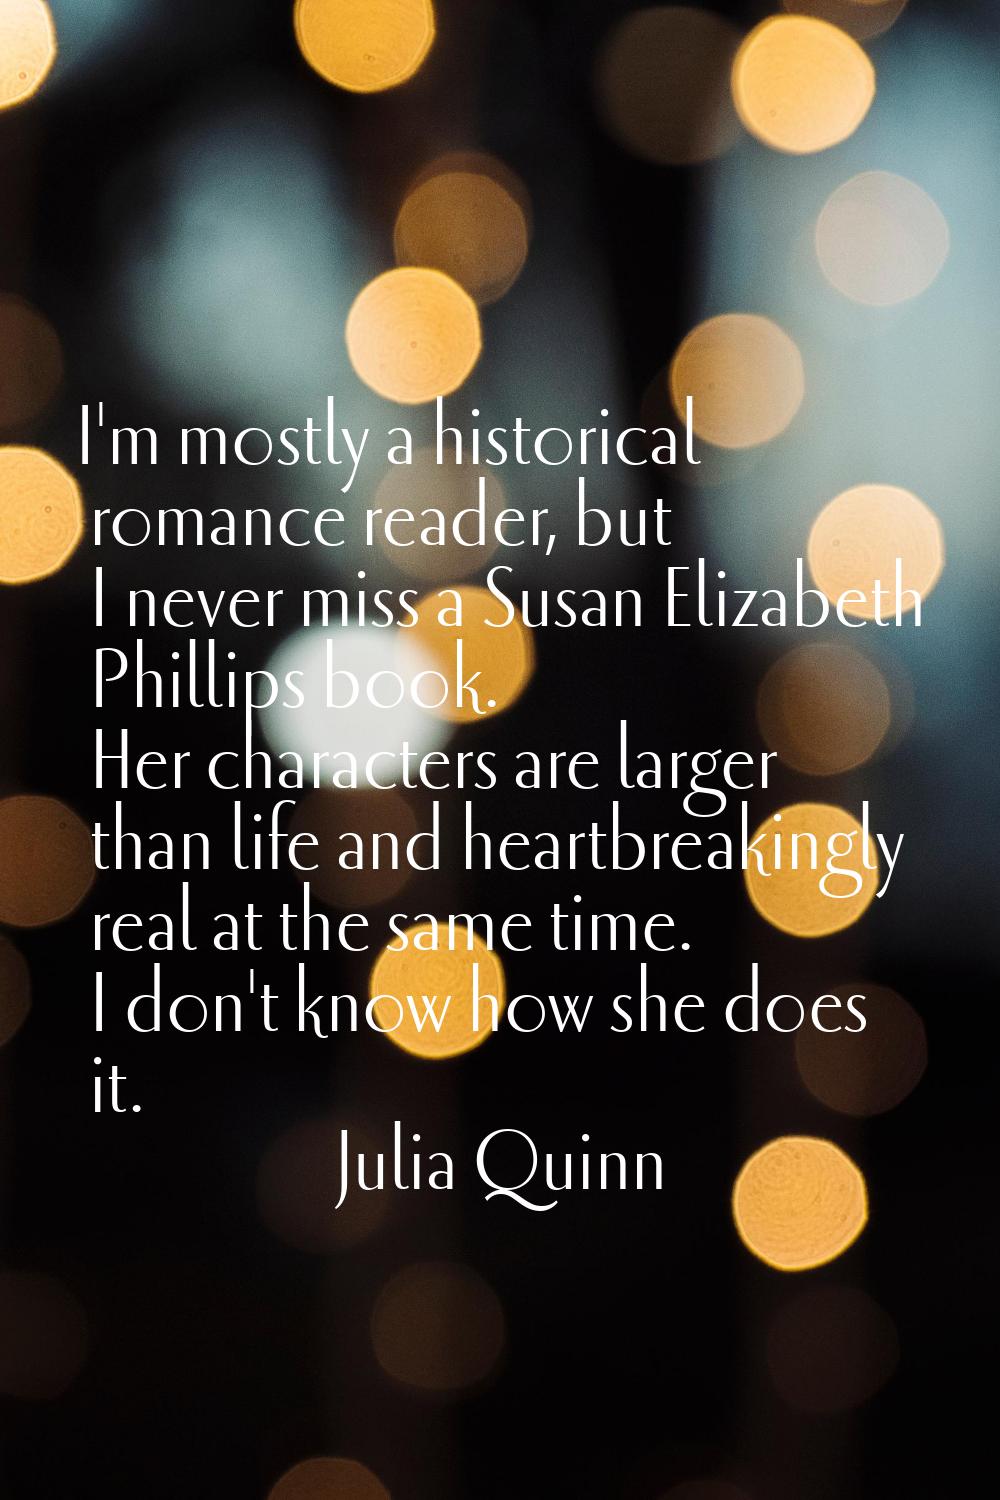 I'm mostly a historical romance reader, but I never miss a Susan Elizabeth Phillips book. Her chara